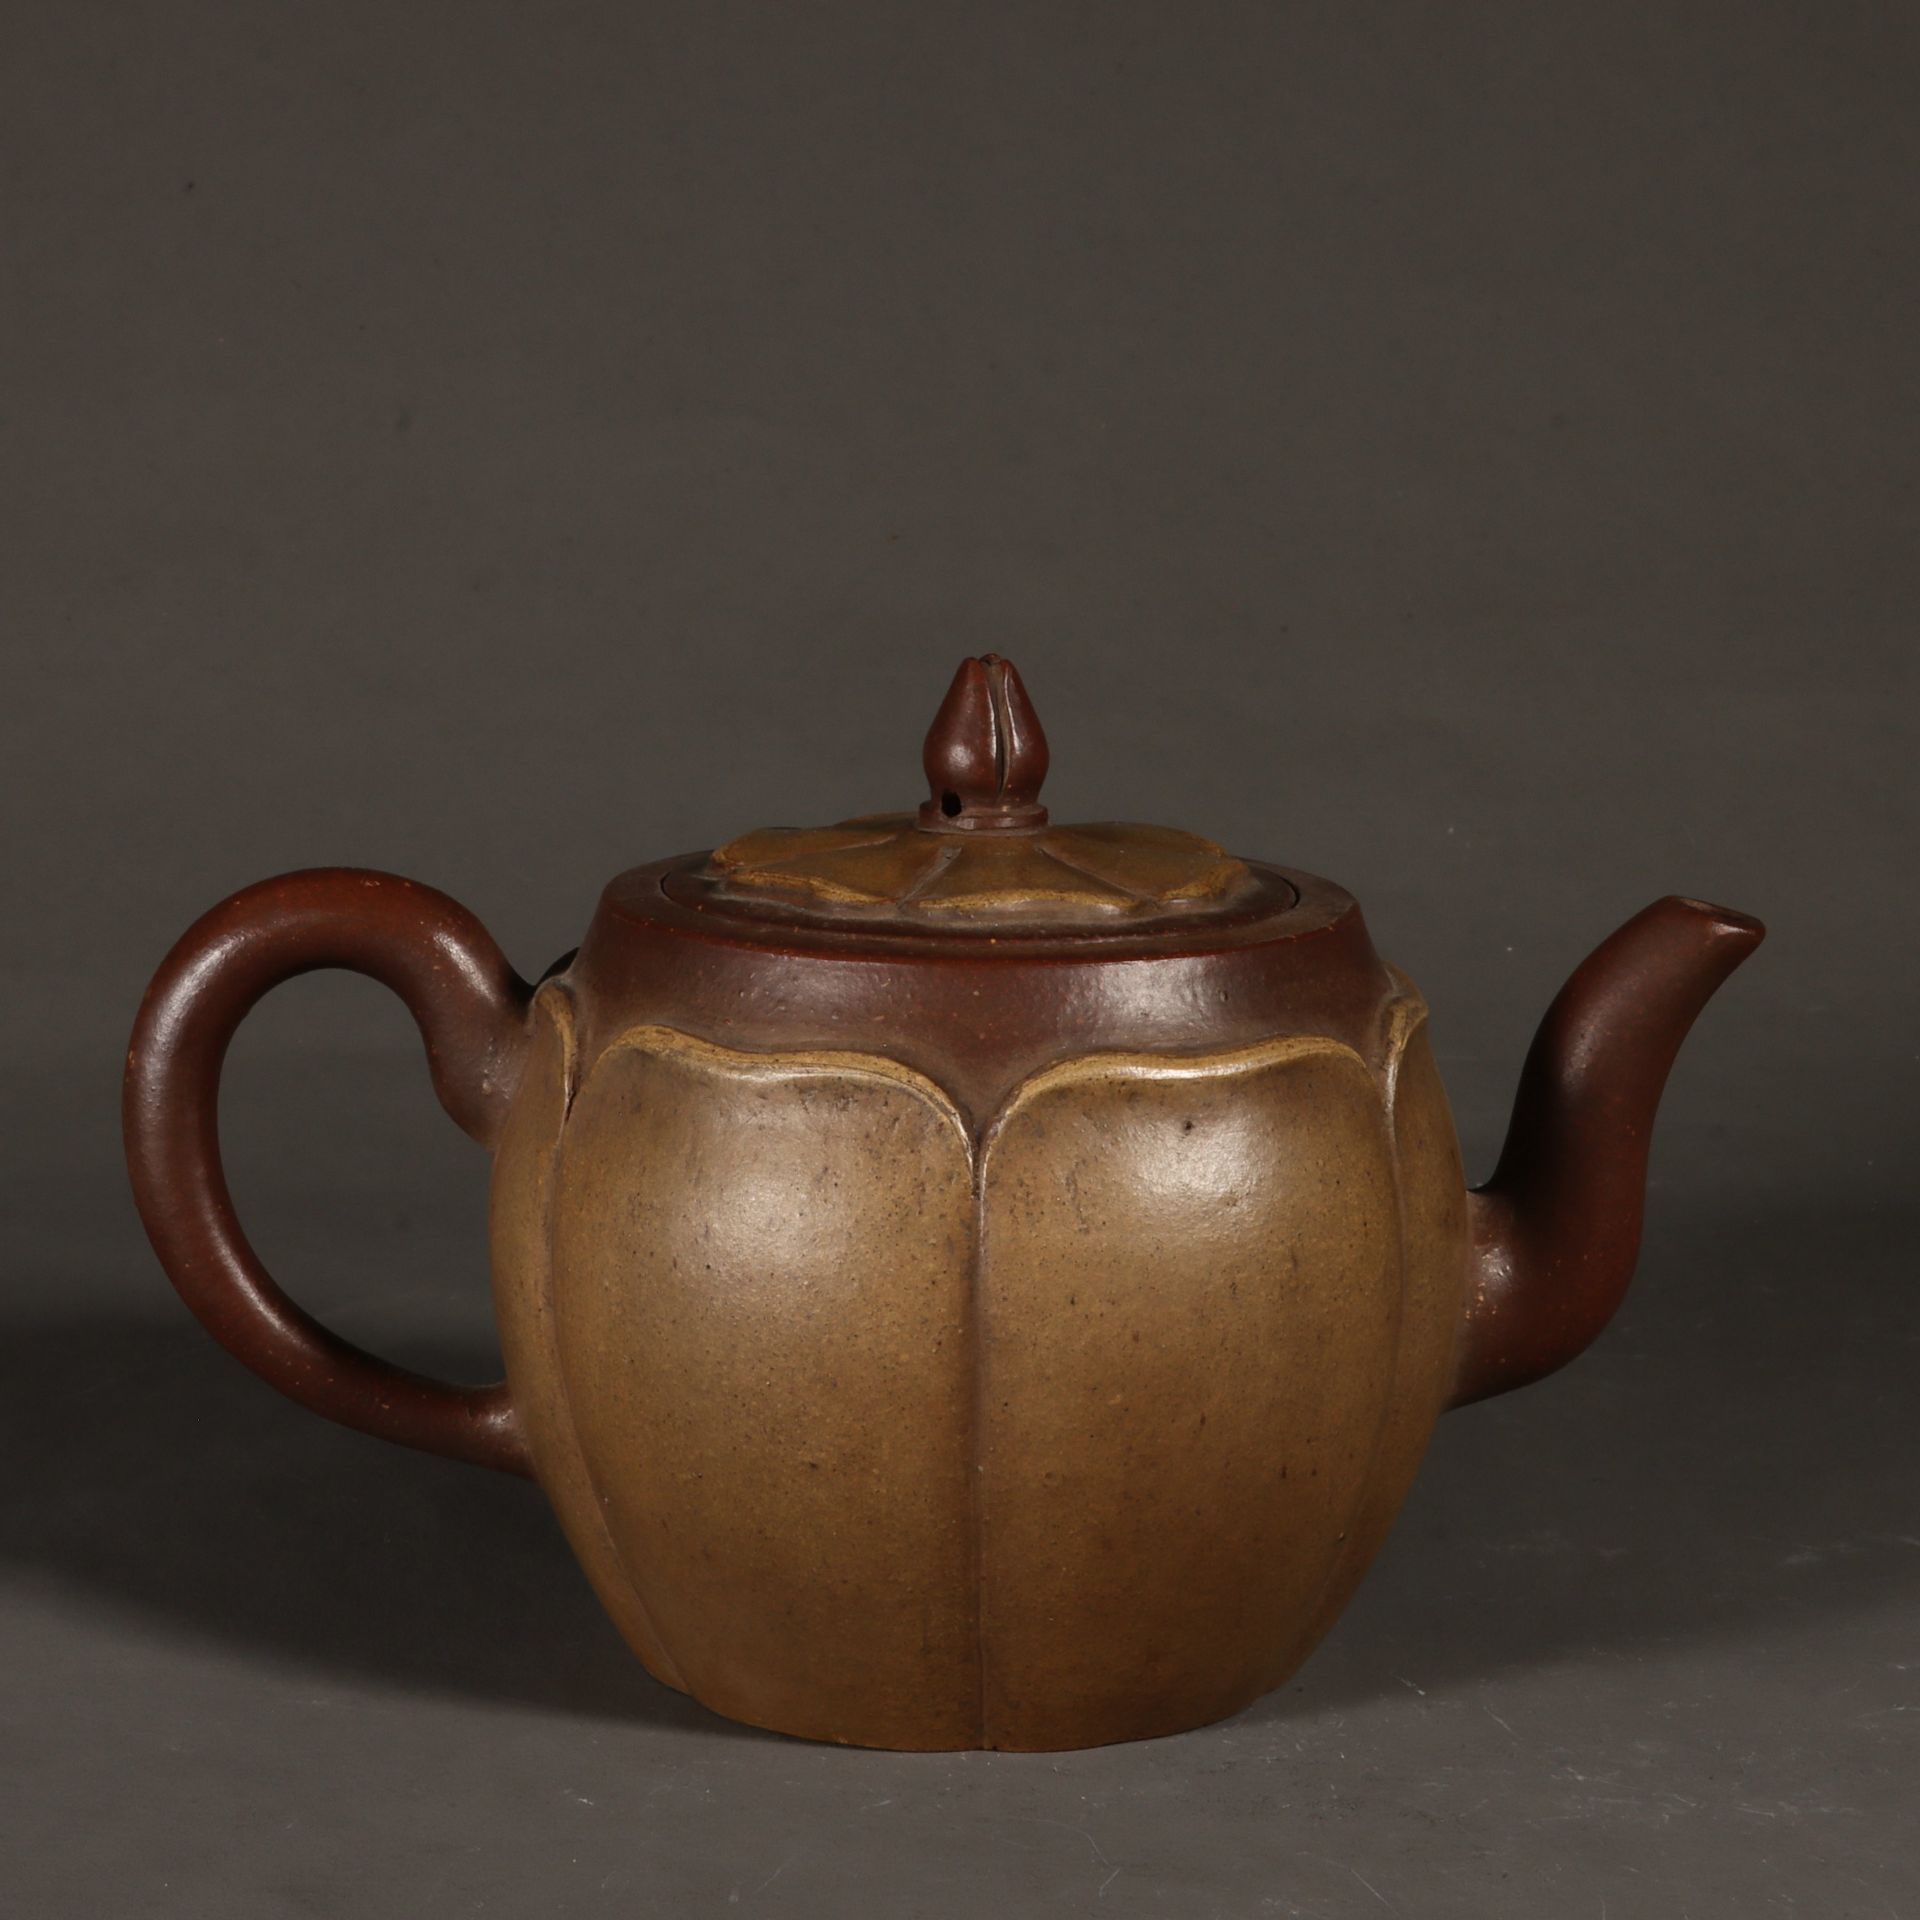 Purple clay pot from the Qing Dynasty - Image 6 of 9